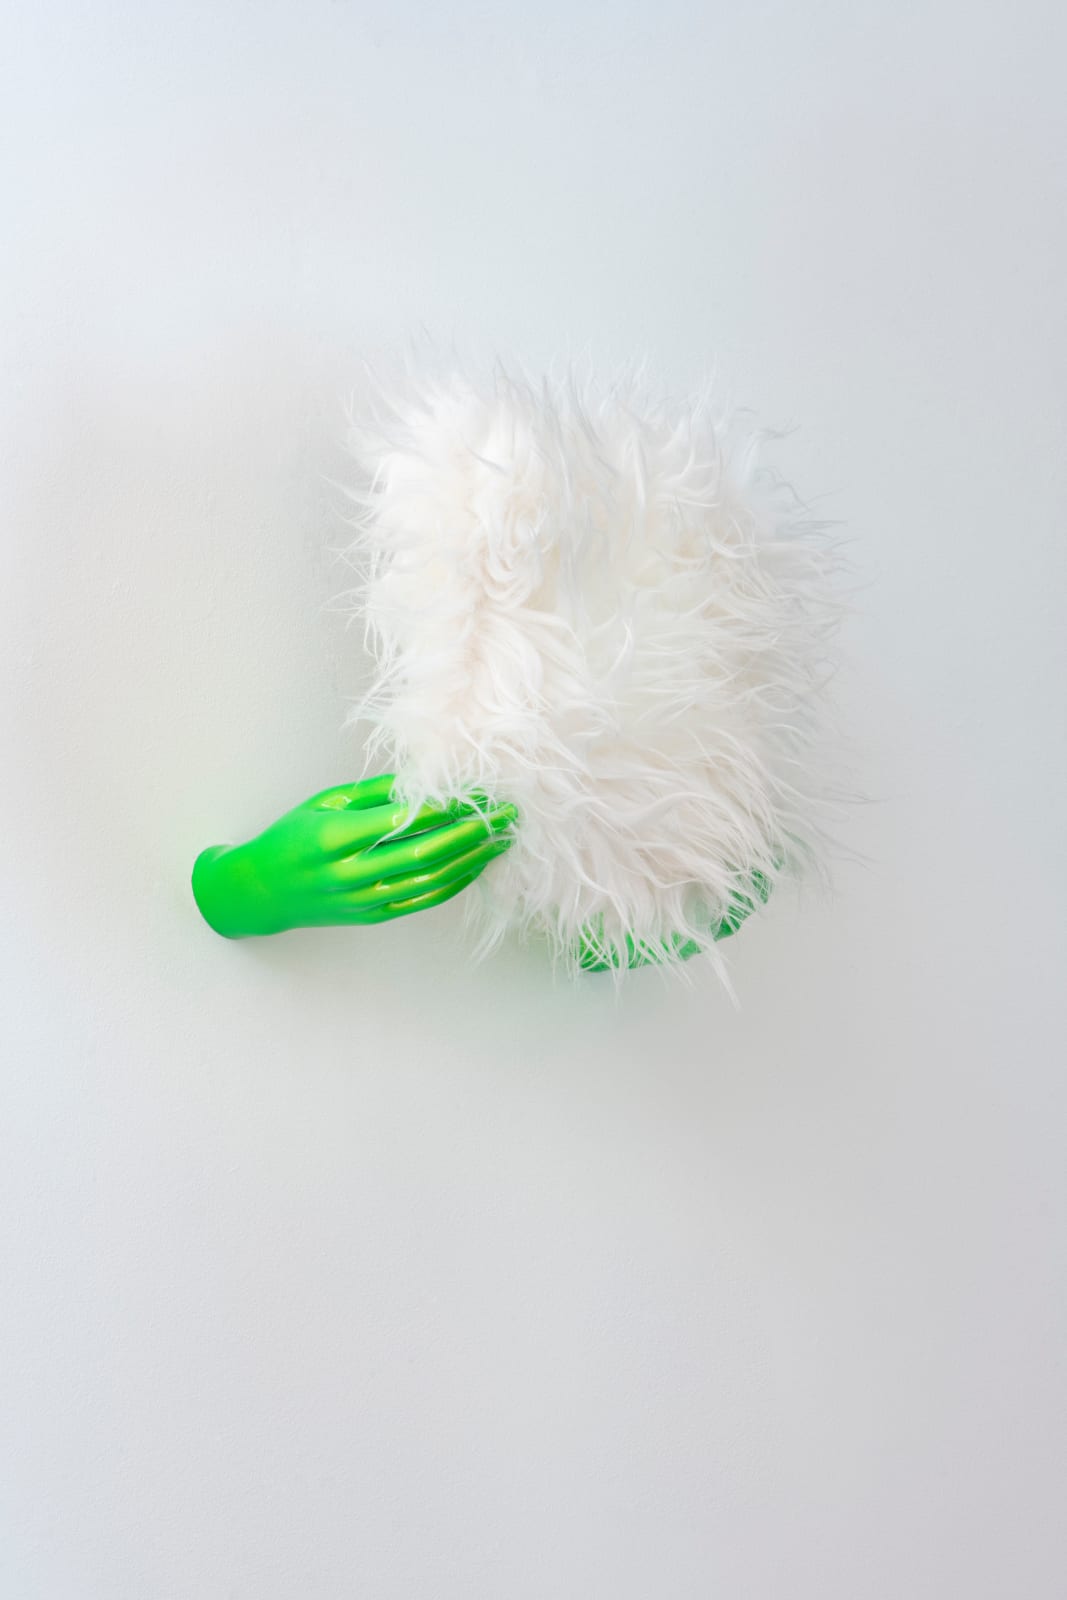 Sylvie Fleury, Untitled (gold neon green, white cuddly painting), 2022